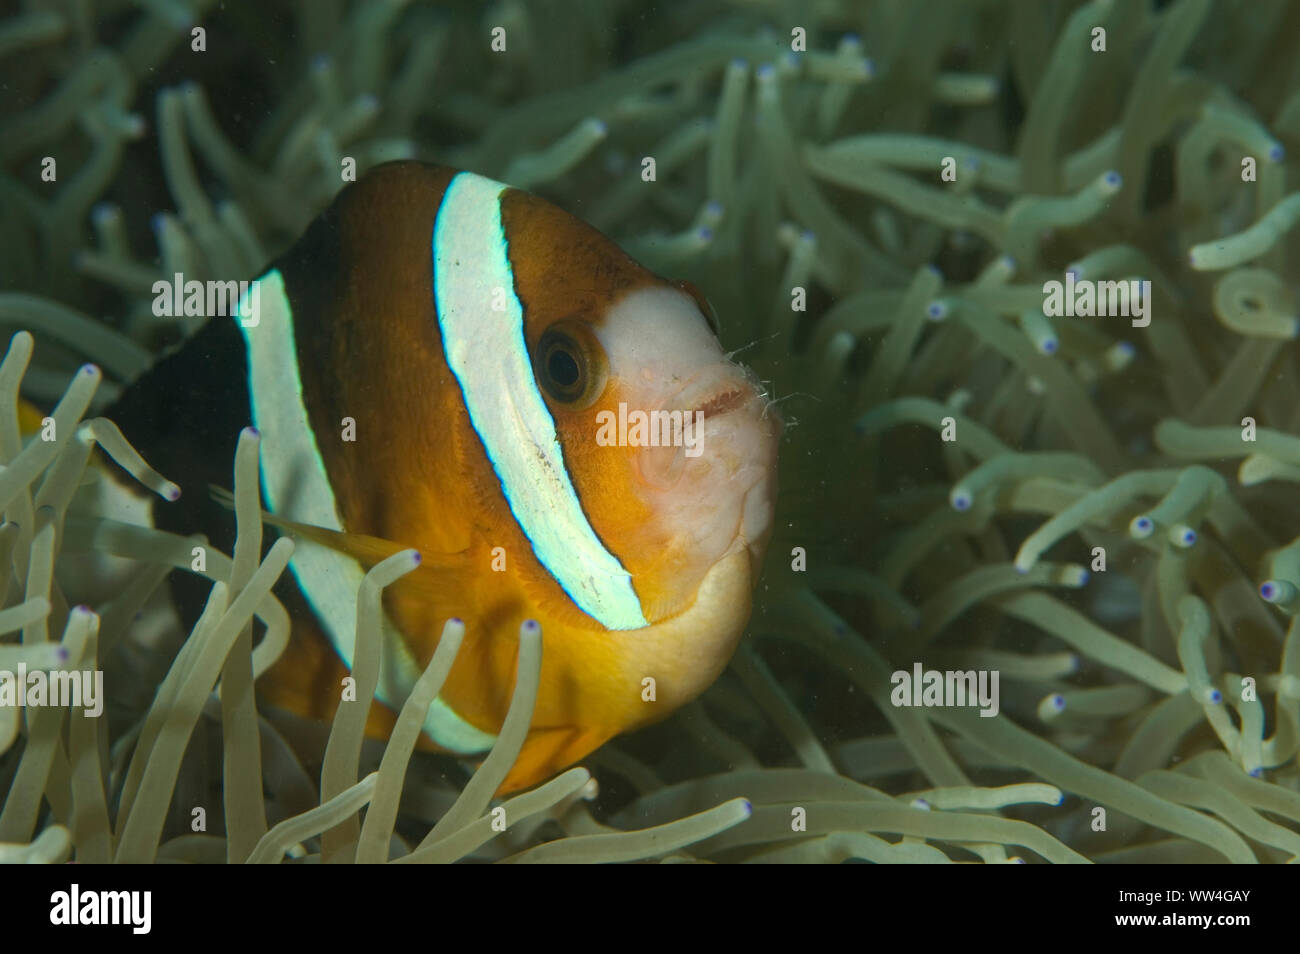 Threeband Anemonefish, Amphiprion tricinctus, with hairs from polychaete worm attack, in Blue-tipped Leathery Sea Anemone, Heteractis crispa Stock Photo